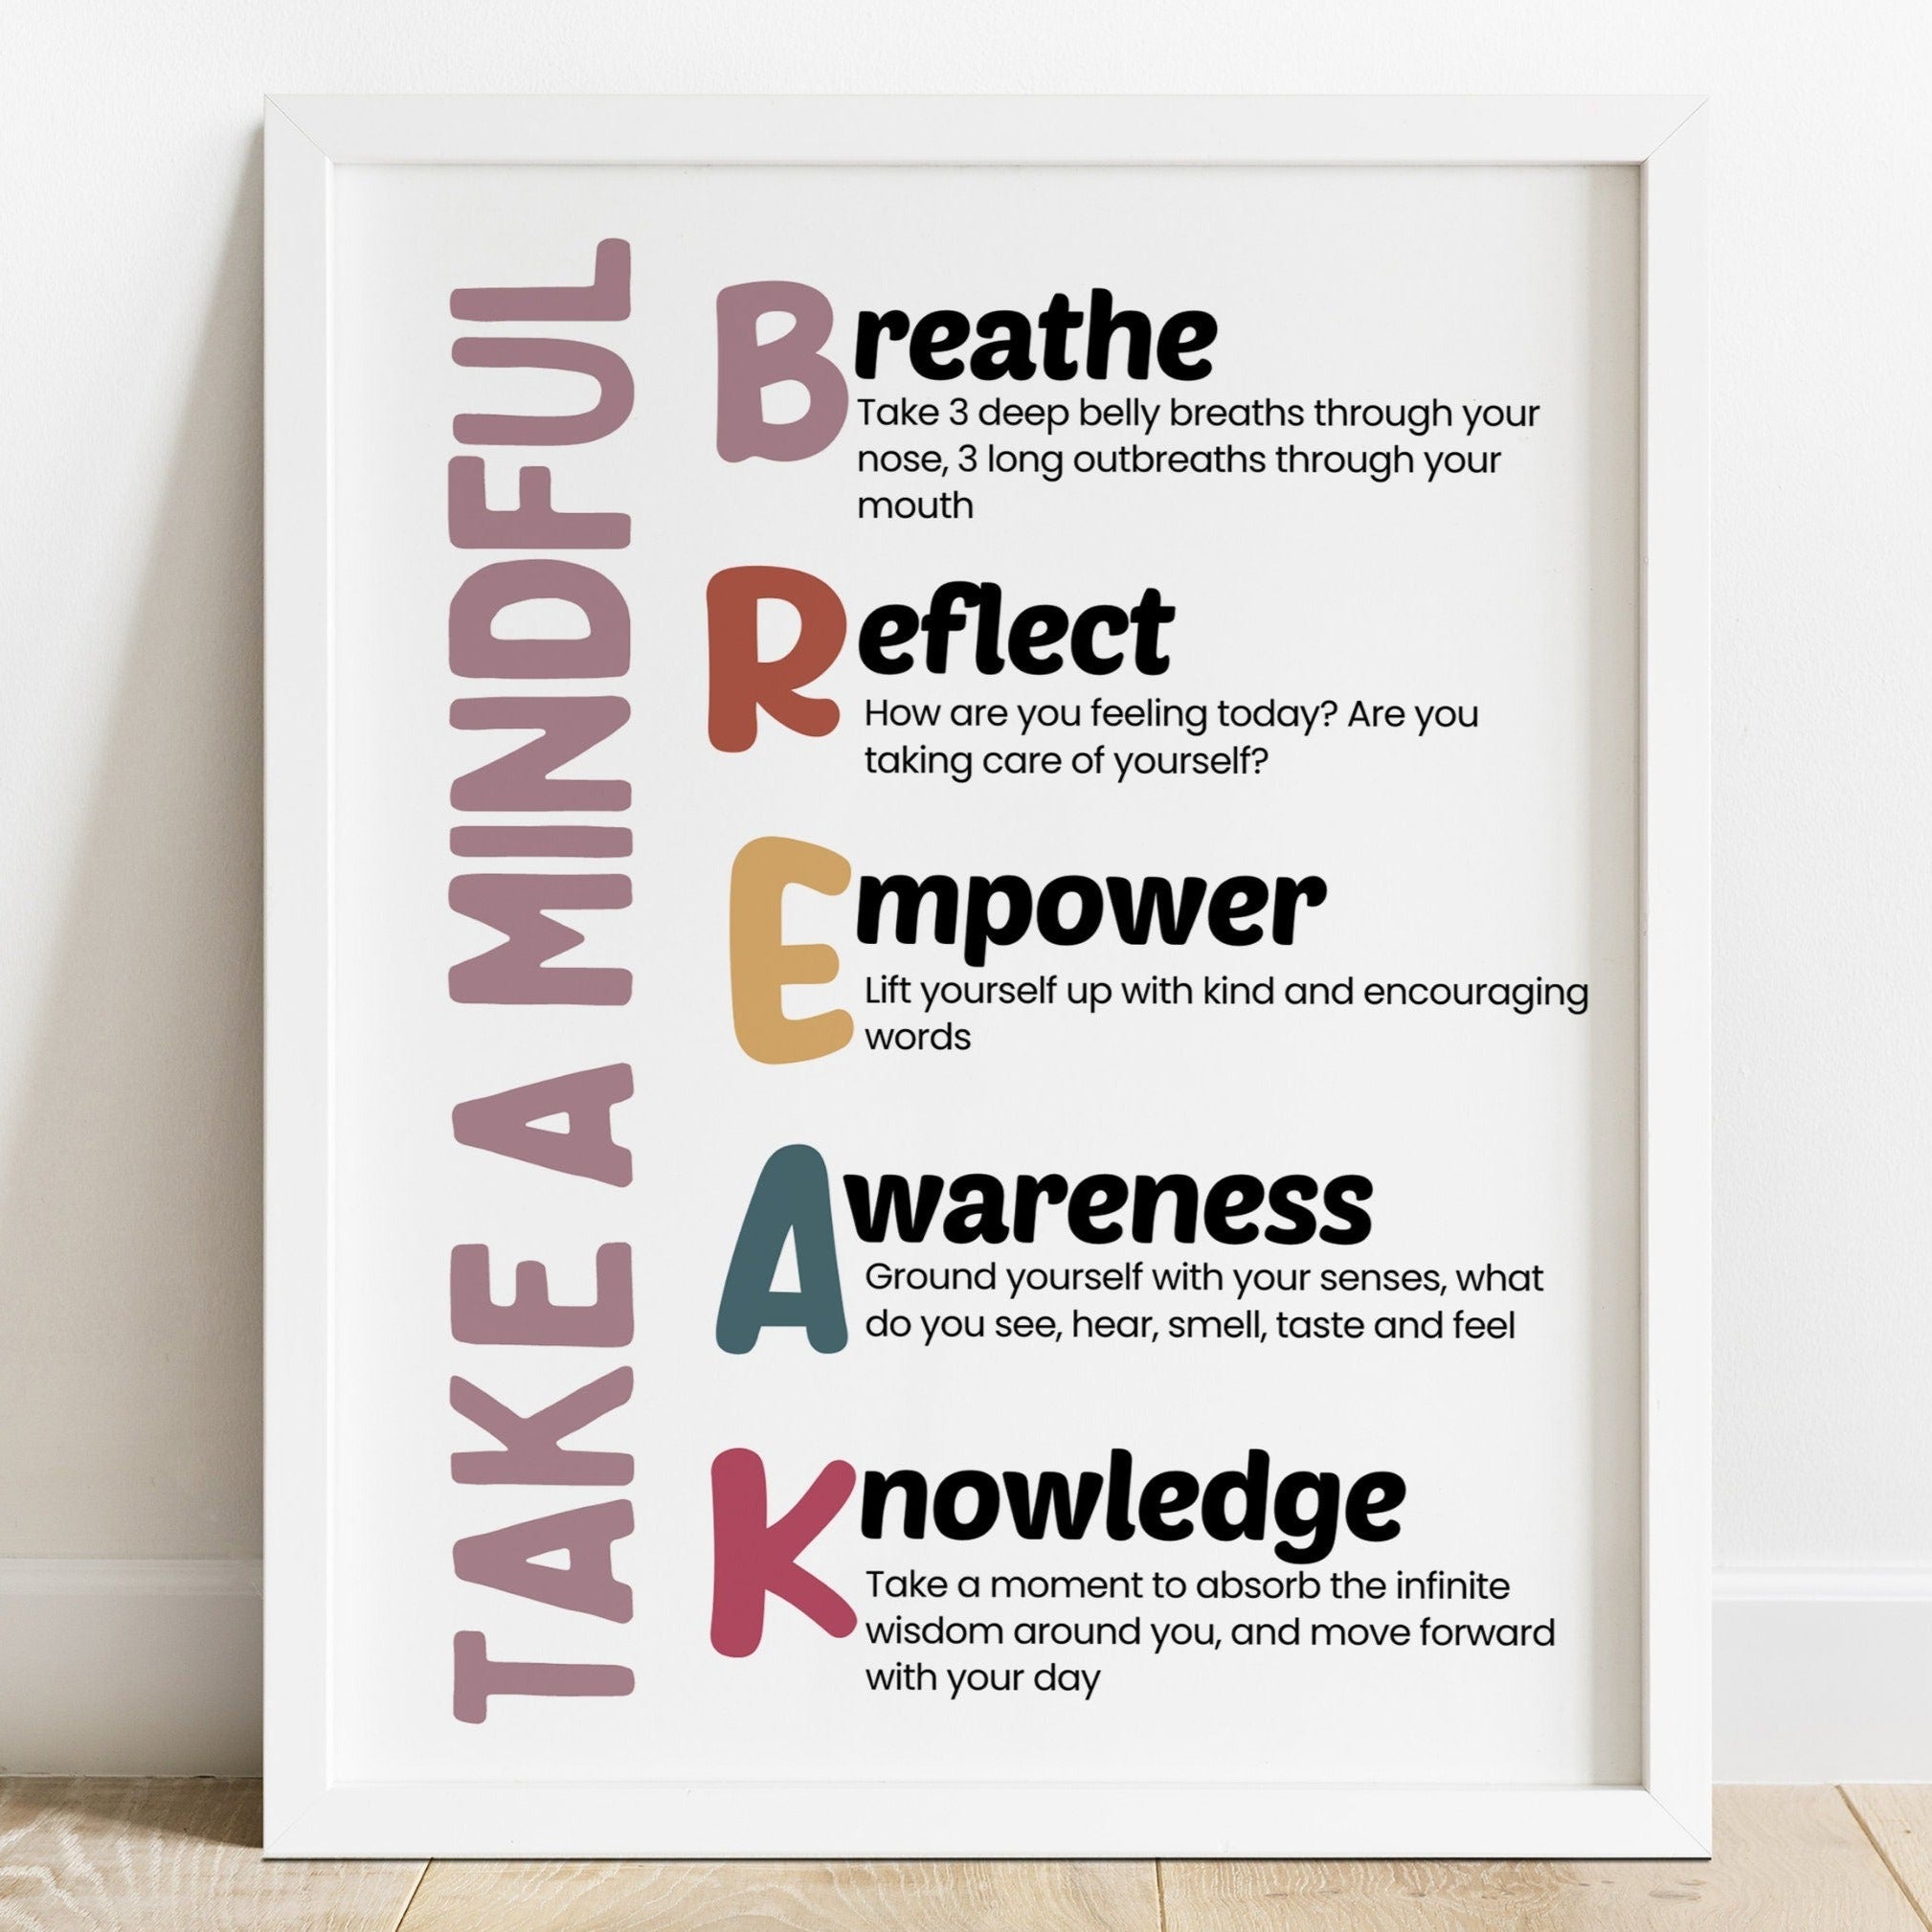 Mental Health Awareness Healthy Body Healthy Mind' Poster 18x24